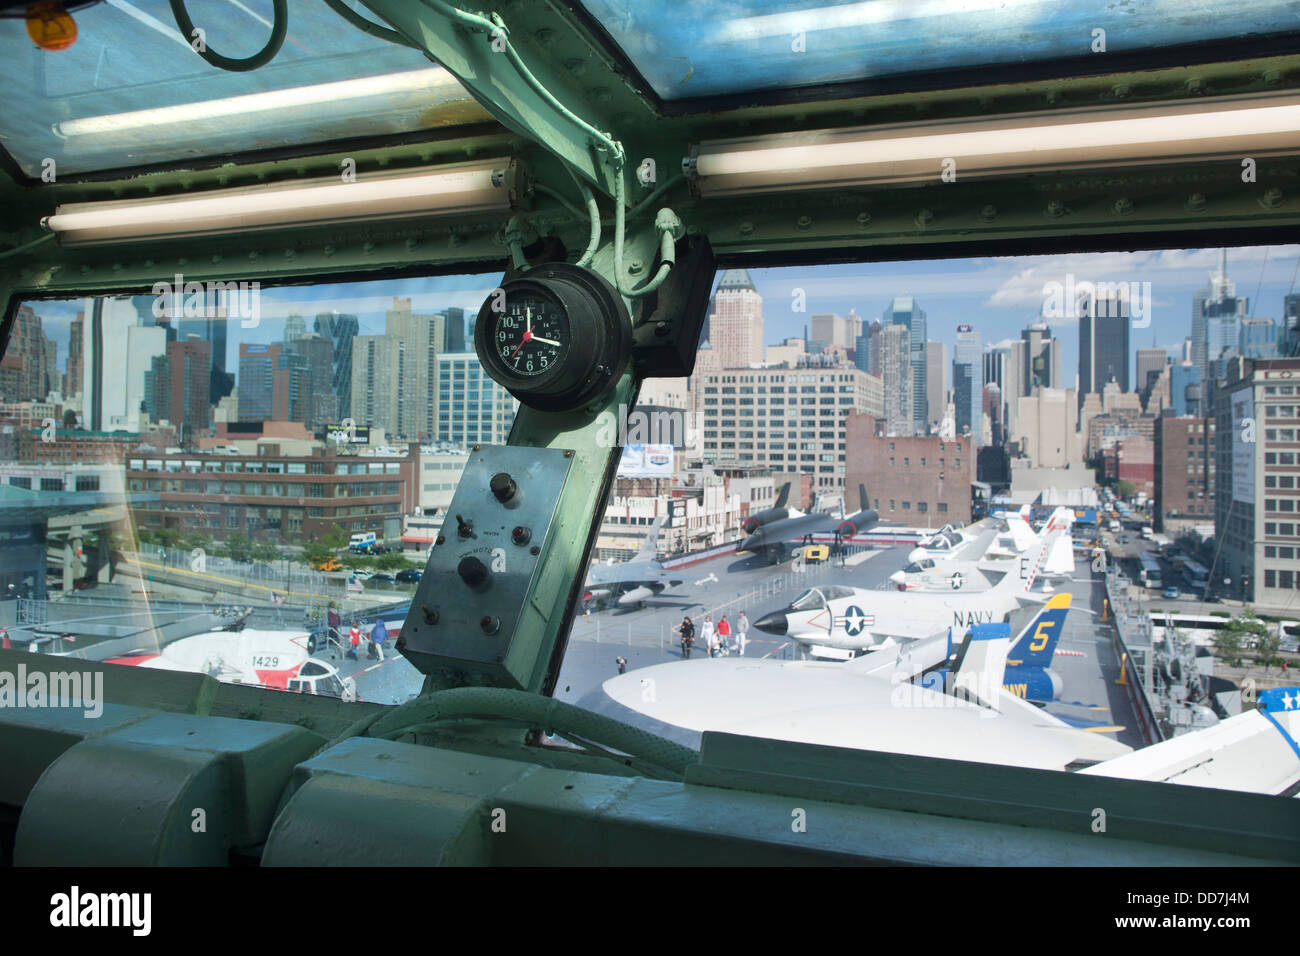 BRIDGE LOOKING OUT AT FLIGHT DECK INTREPID SEA AIR AND SPACE MUSEUM MANHATTAN NEW YORK CITY USA Stock Photo